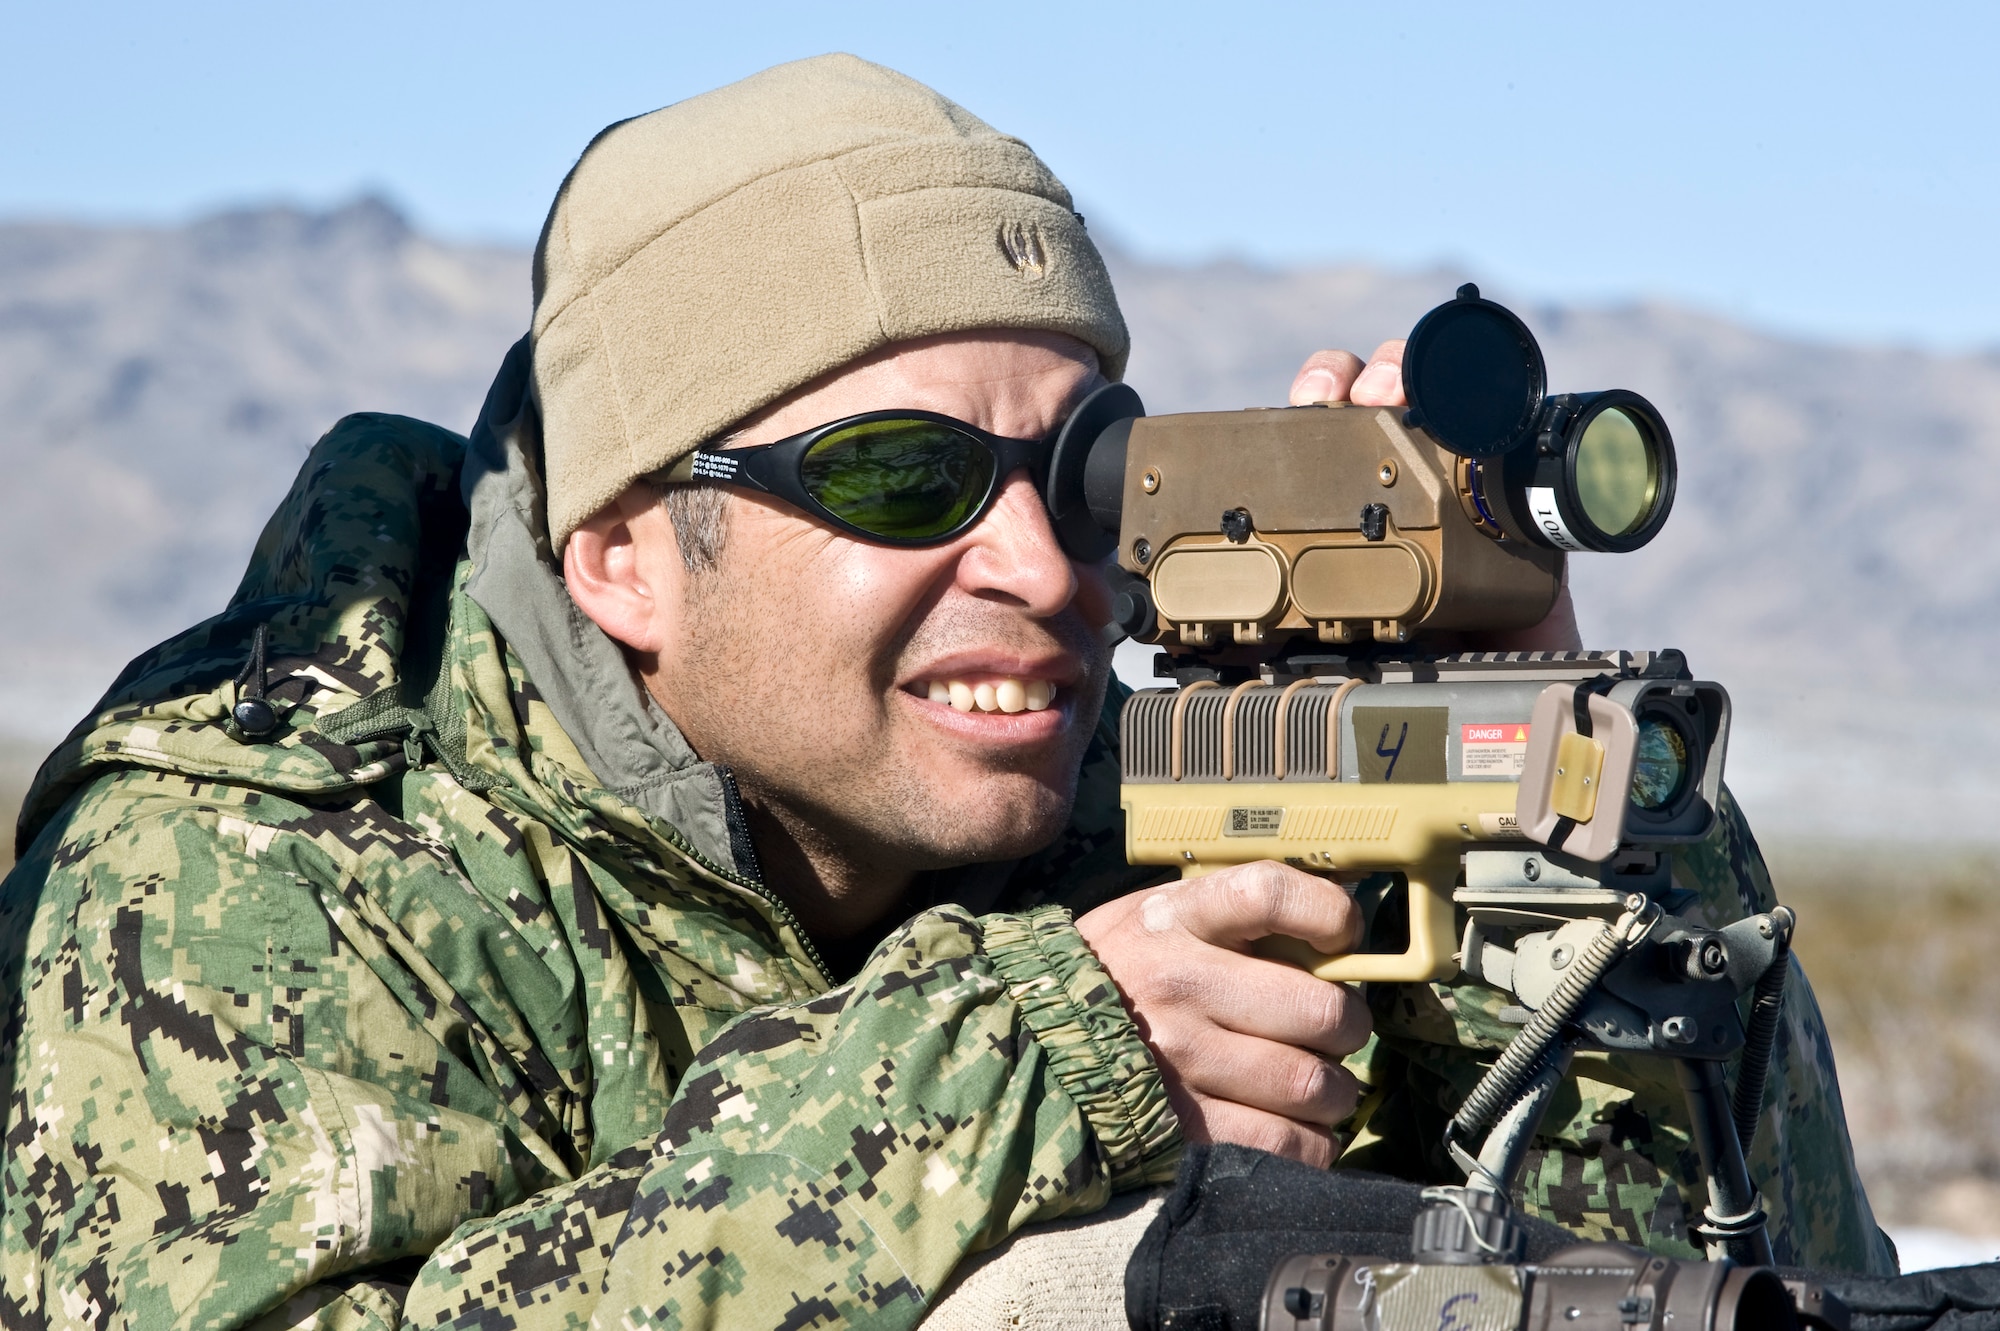 U.S. Navy Chief Petty Officer Carlos Vargas, Naval Special Warfare combatant crewman, bore sights an LA-10u/PEQ handheld laser marker during a Handheld Laser Marker Tactics Development and Evaluation project Dec. 10, 2013, at the Nevada Test and Training Range. The handheld laser marker is a small, lightweight device that emits NATO Band I/II compatible coded laser energy to quickly mark and handoff targets for engagement with precision guided munitions. (U.S. Air Force photo by Senior Airman Matthew Lancaster)